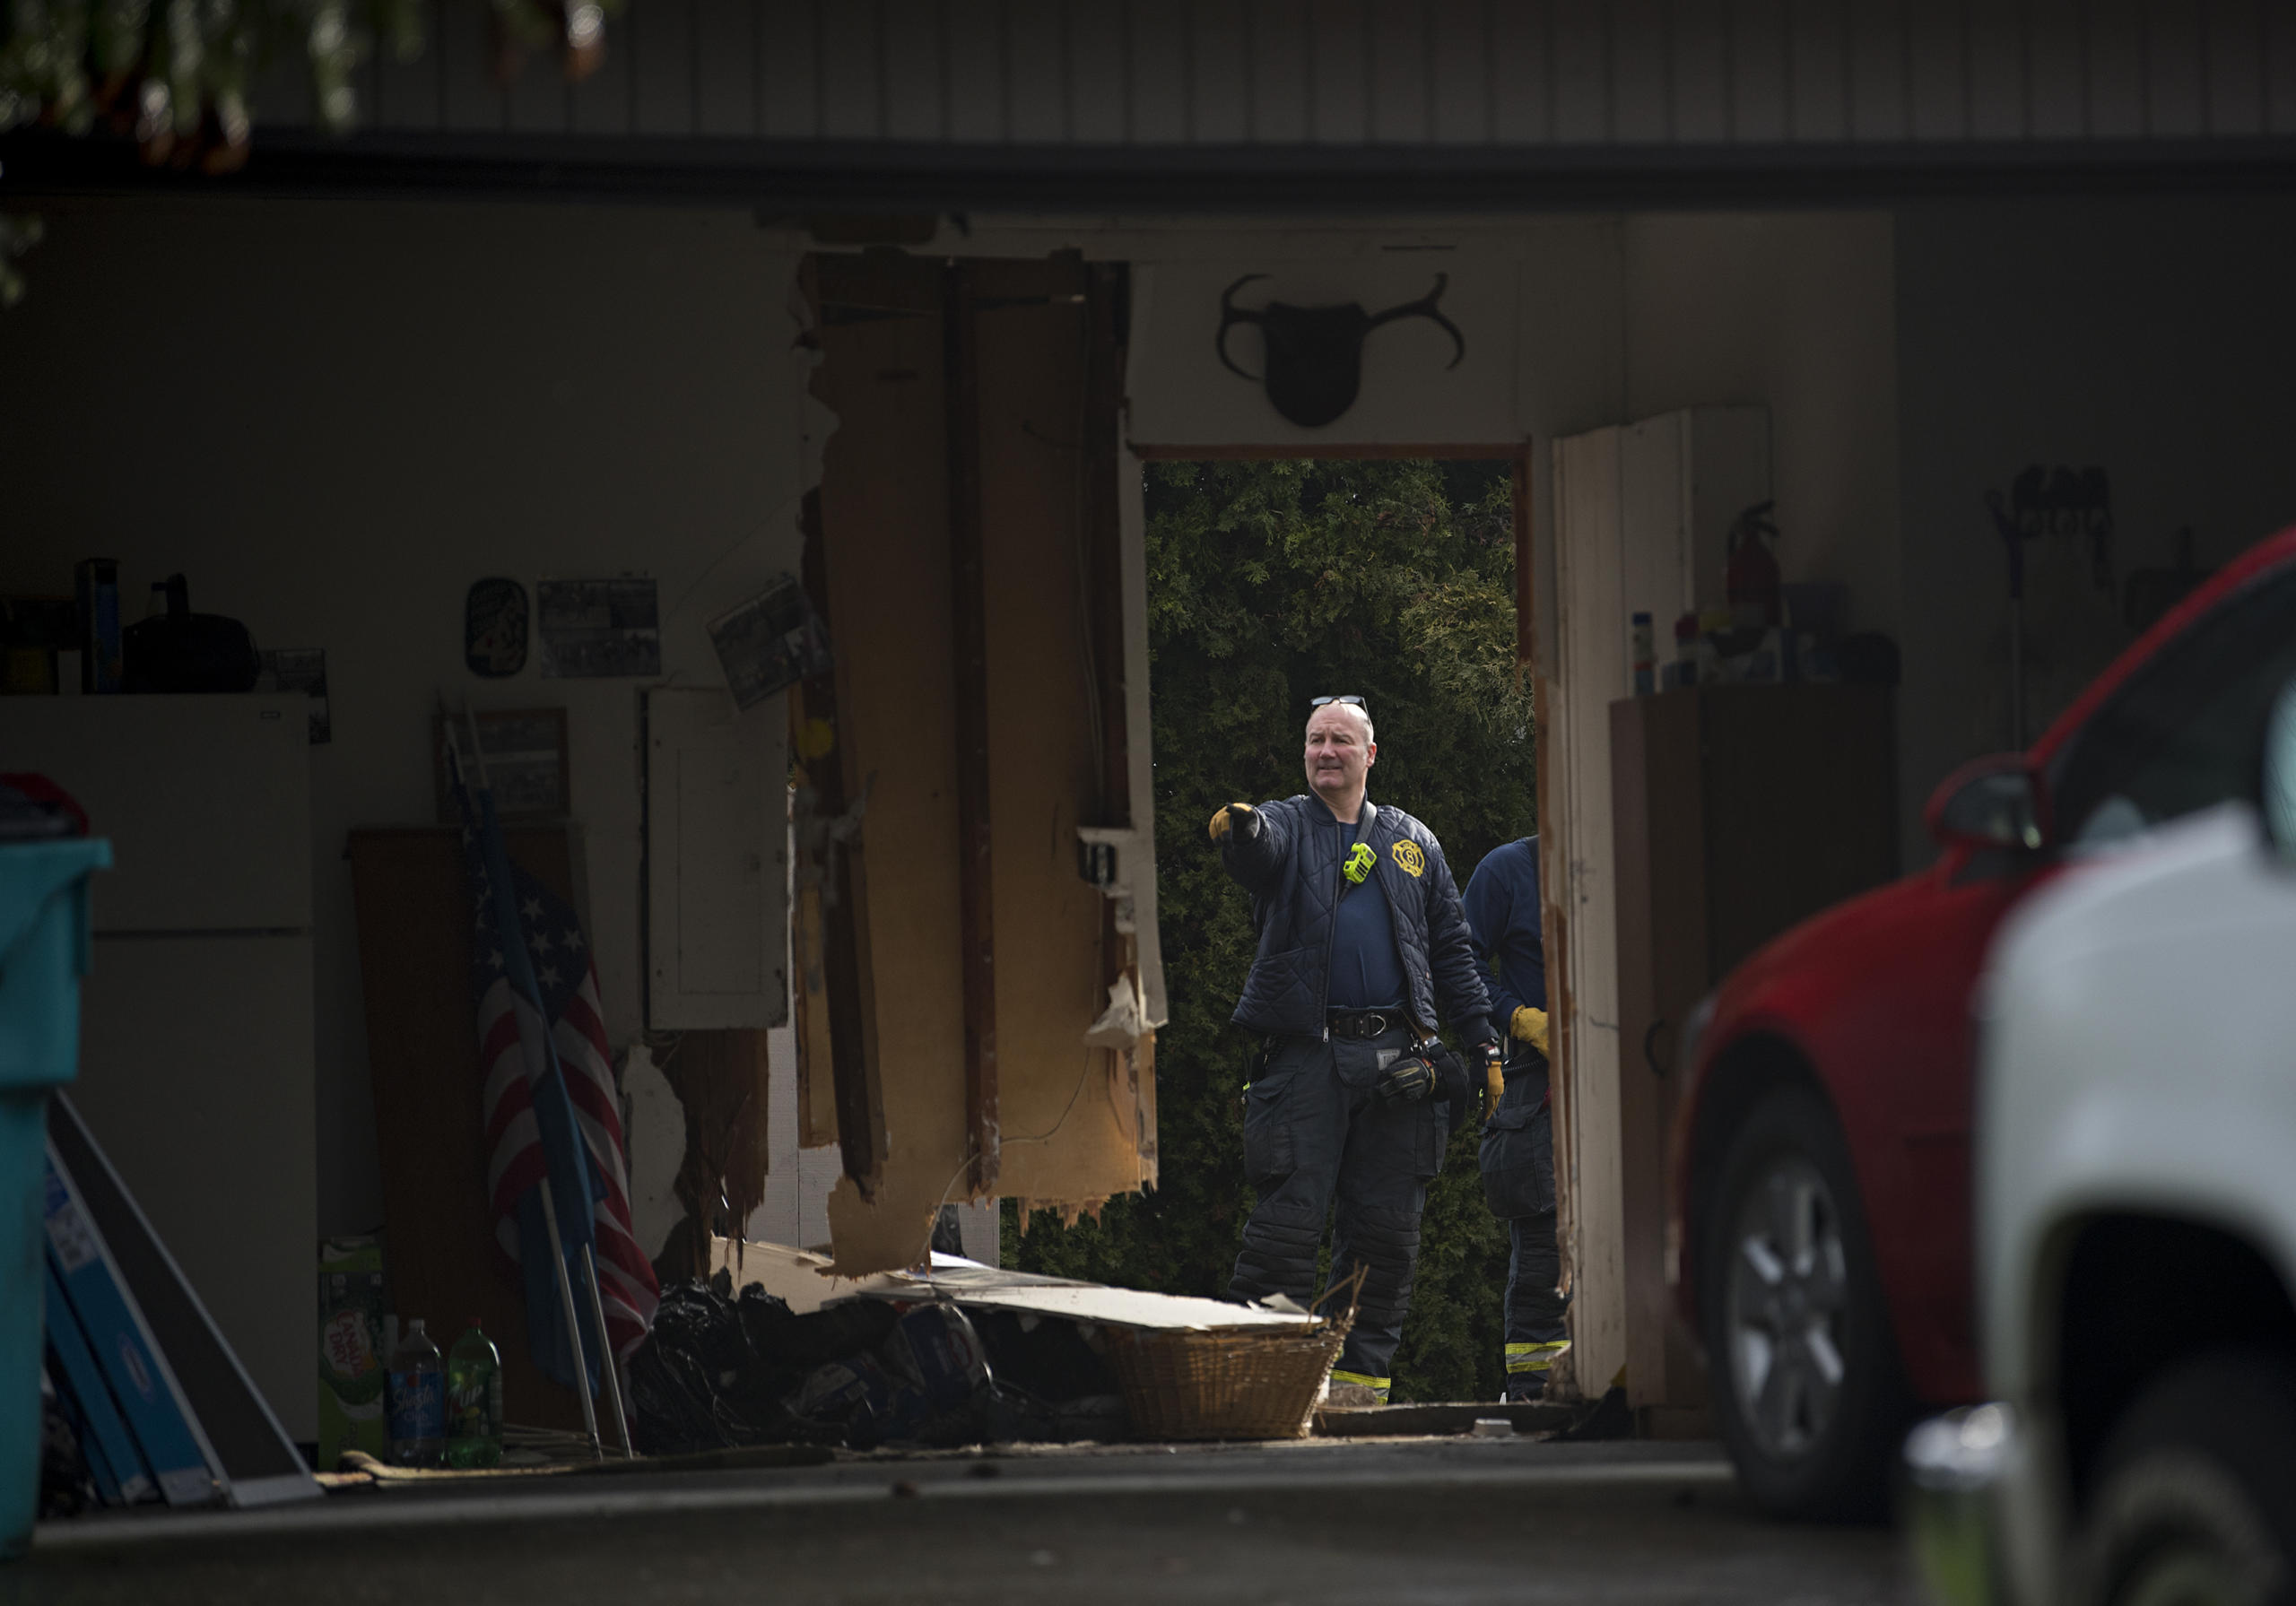 Officials look over the scene after a person reportedly drove through a garage on Northeast 98th Avenue, out the back fence and across Marrion School Park before abandoning the vehicle nearby Friday morning, Feb. 18, 2021. Police are still looking for the driver.